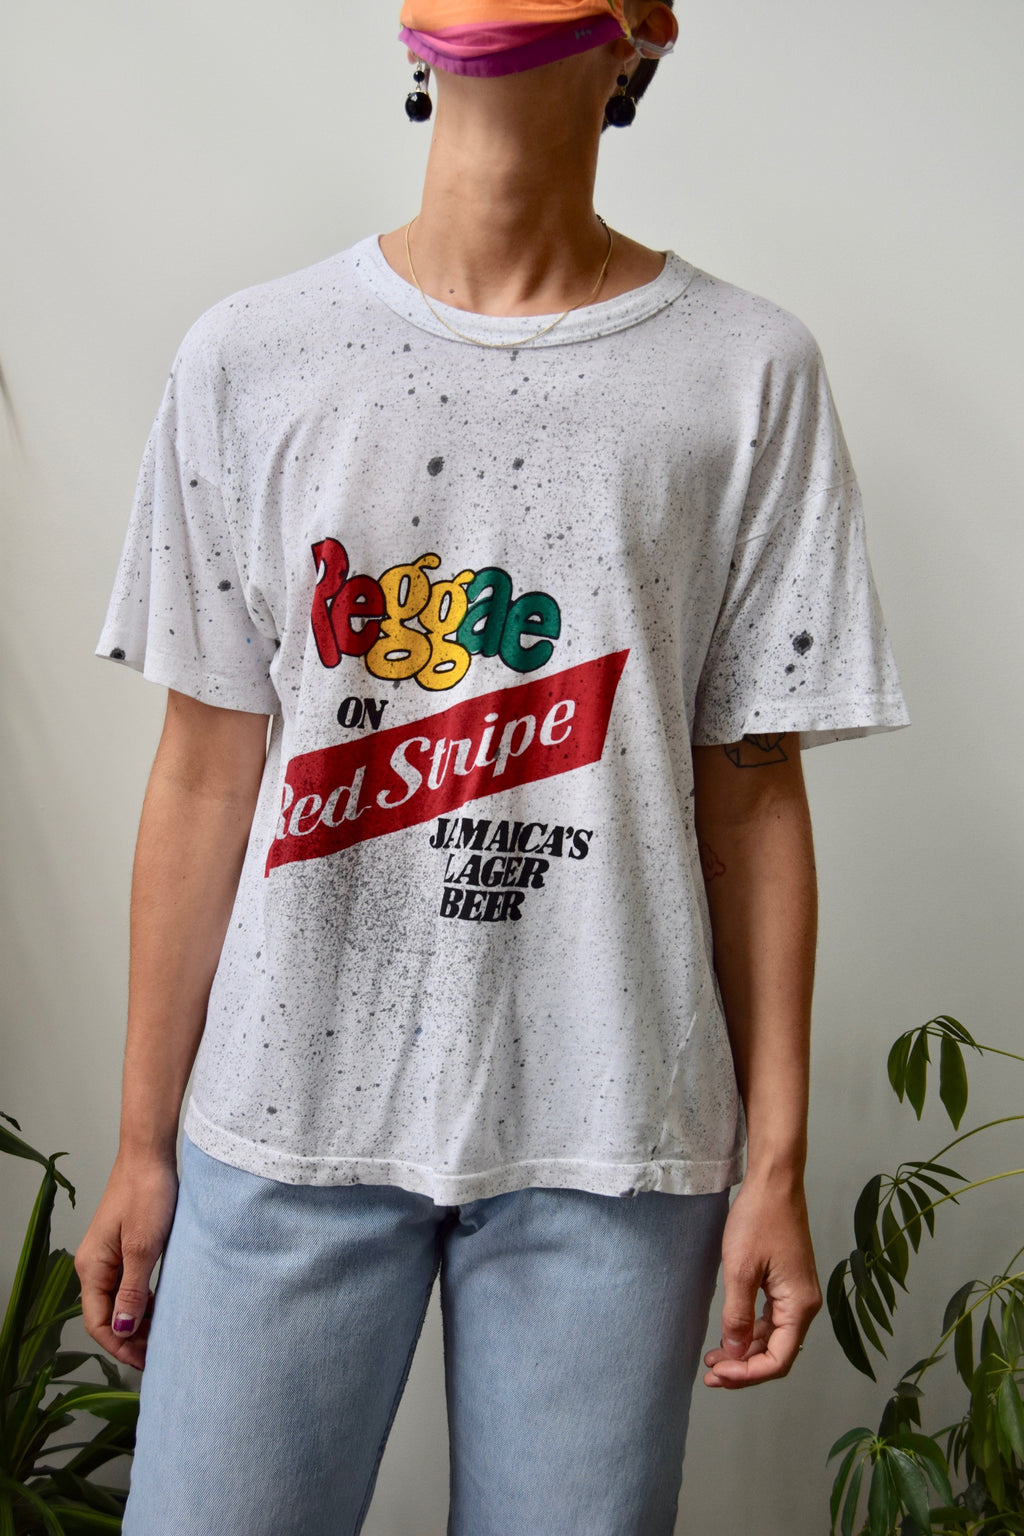 Red Stripe Lager Tee